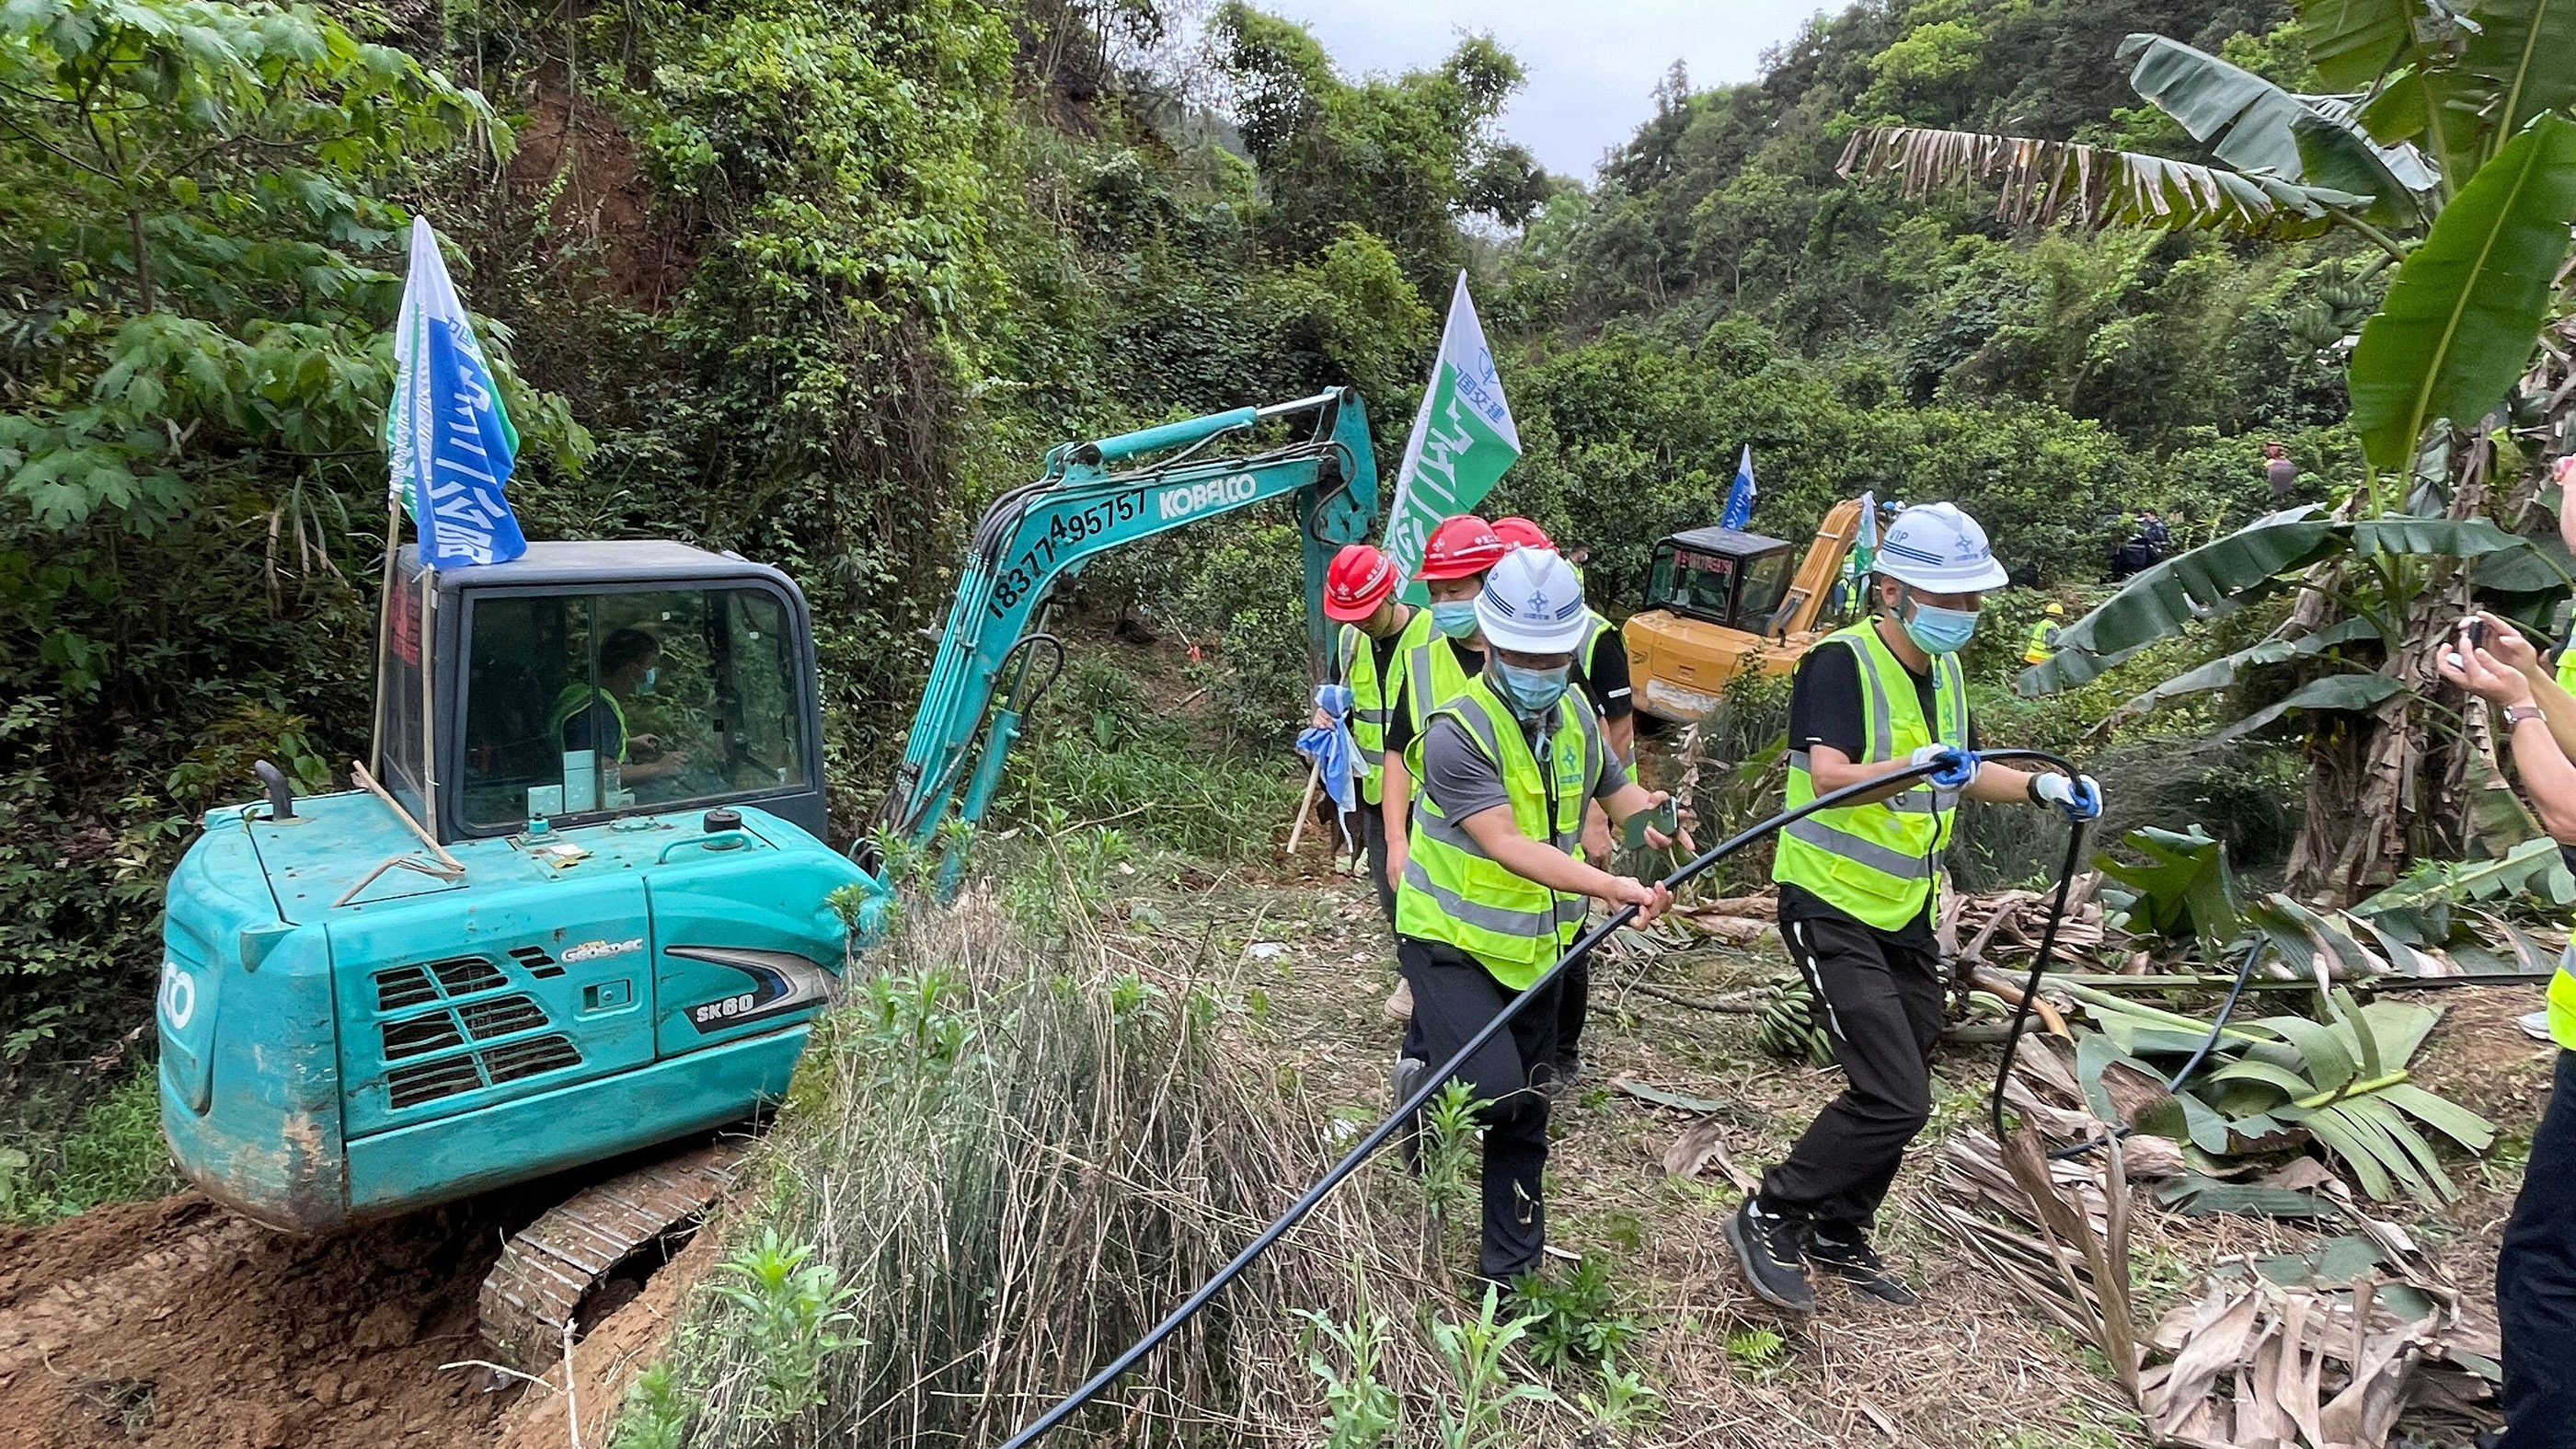 An excavator opening a way to the China Eastern Airlines plane crash site in Tengxian County, south China's Guangxi Zhuang Autonomous Region, March 22, 2022.